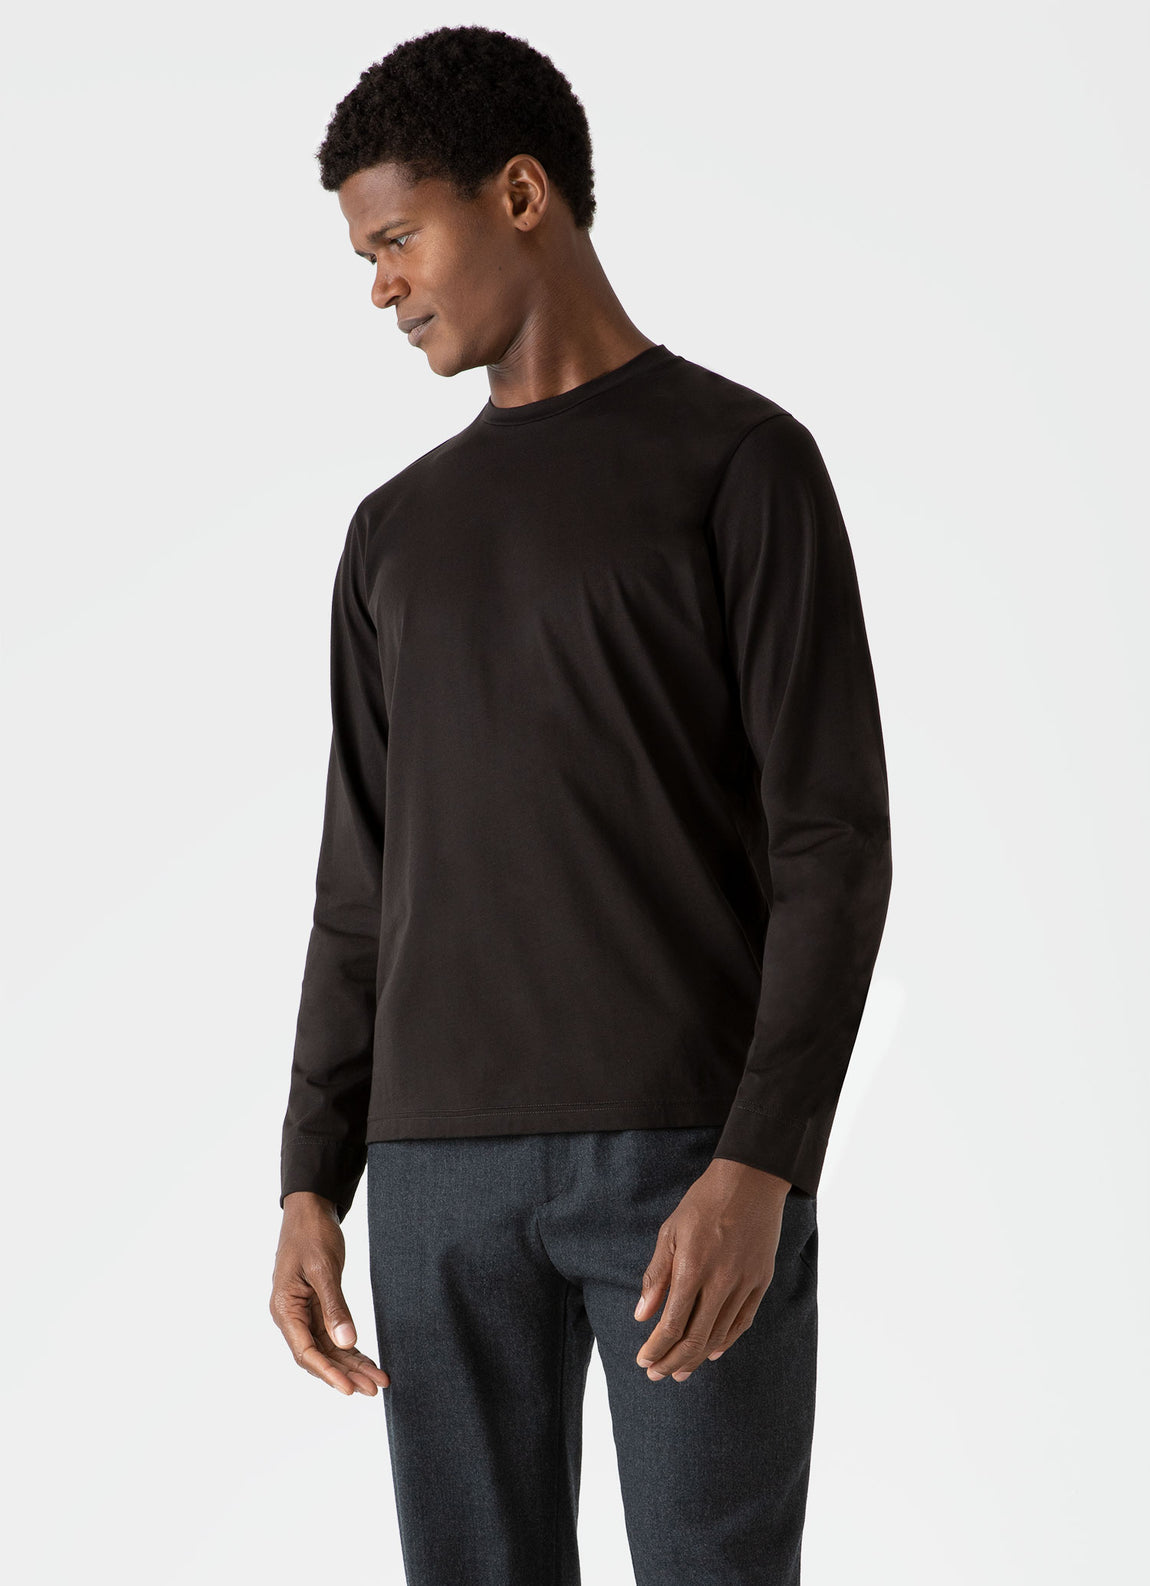 Men's Long Sleeve Riviera Midweight T-shirt in Coffee